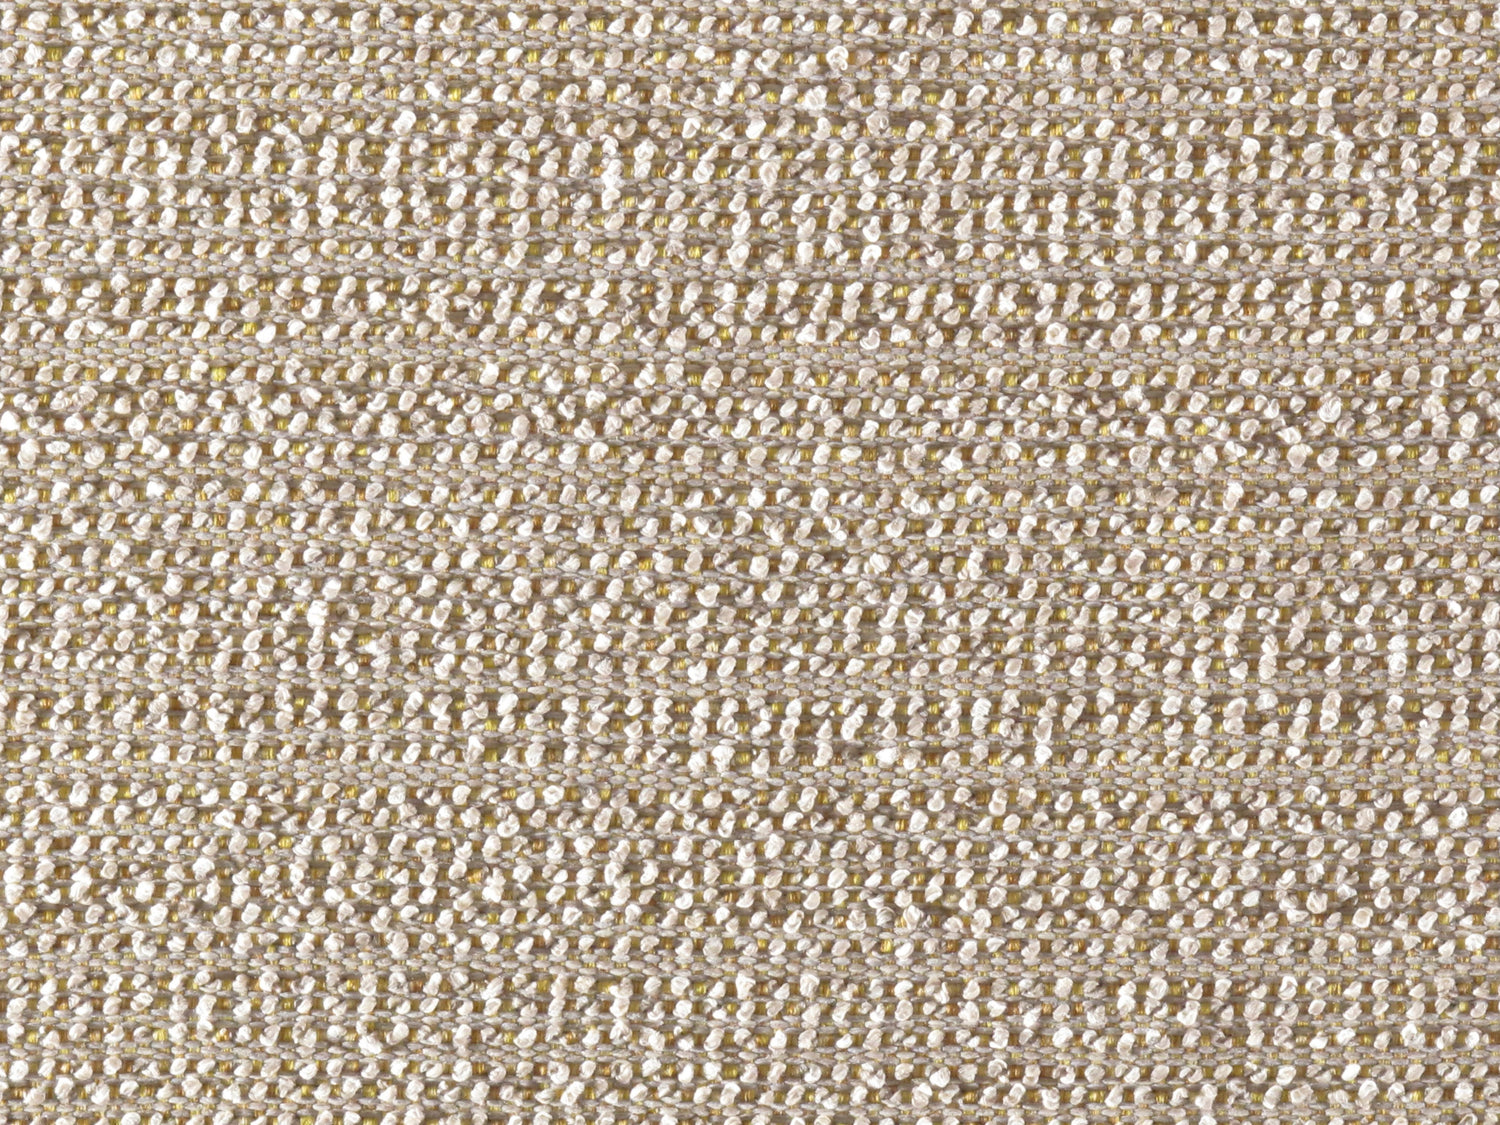 Tennyson fabric in ochre color - pattern number WR 00052827 - by Scalamandre in the Old World Weavers collection